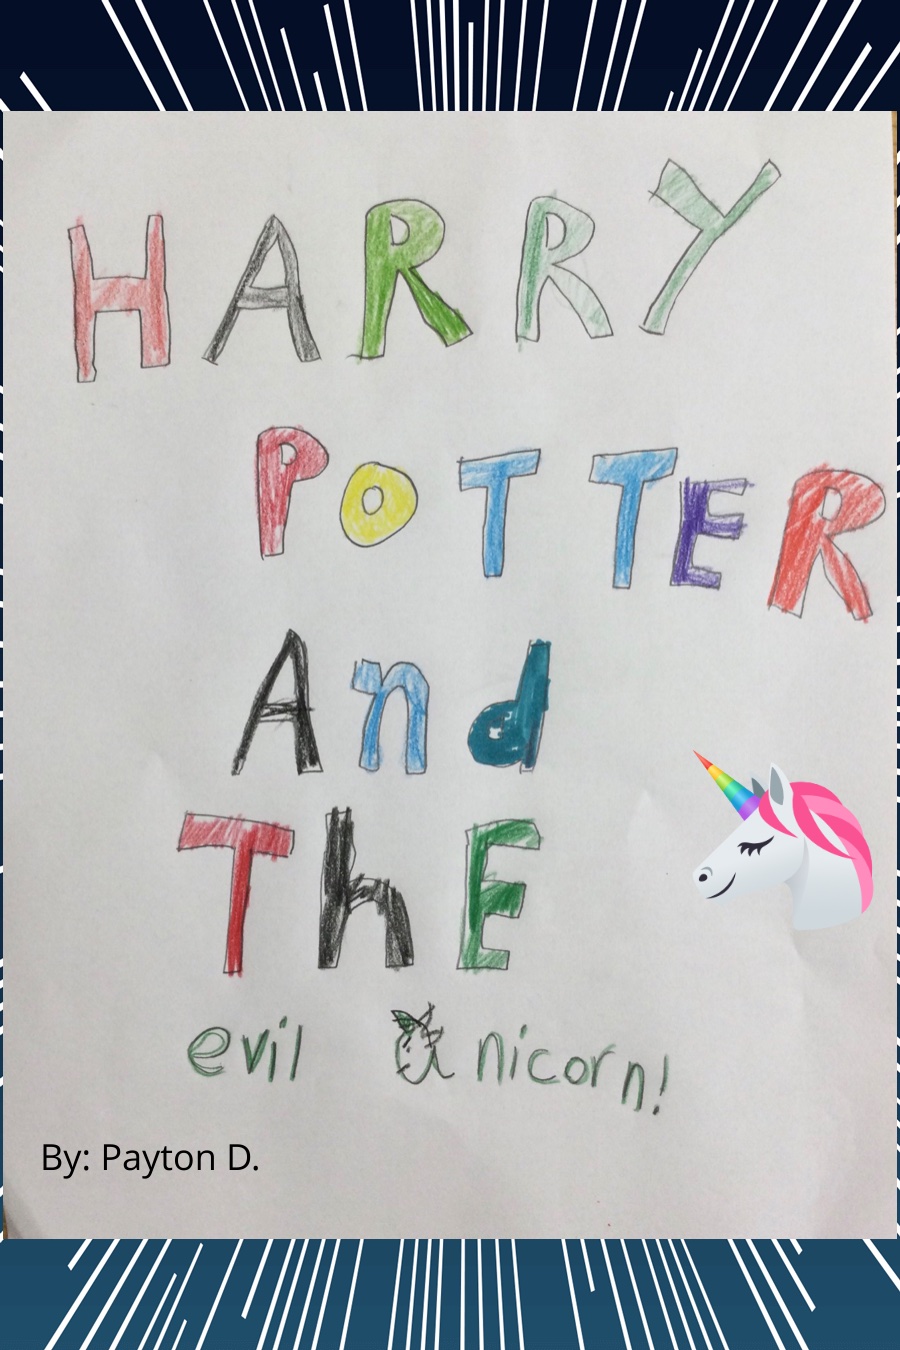 Harry and the Evil Unicorn by Payton D